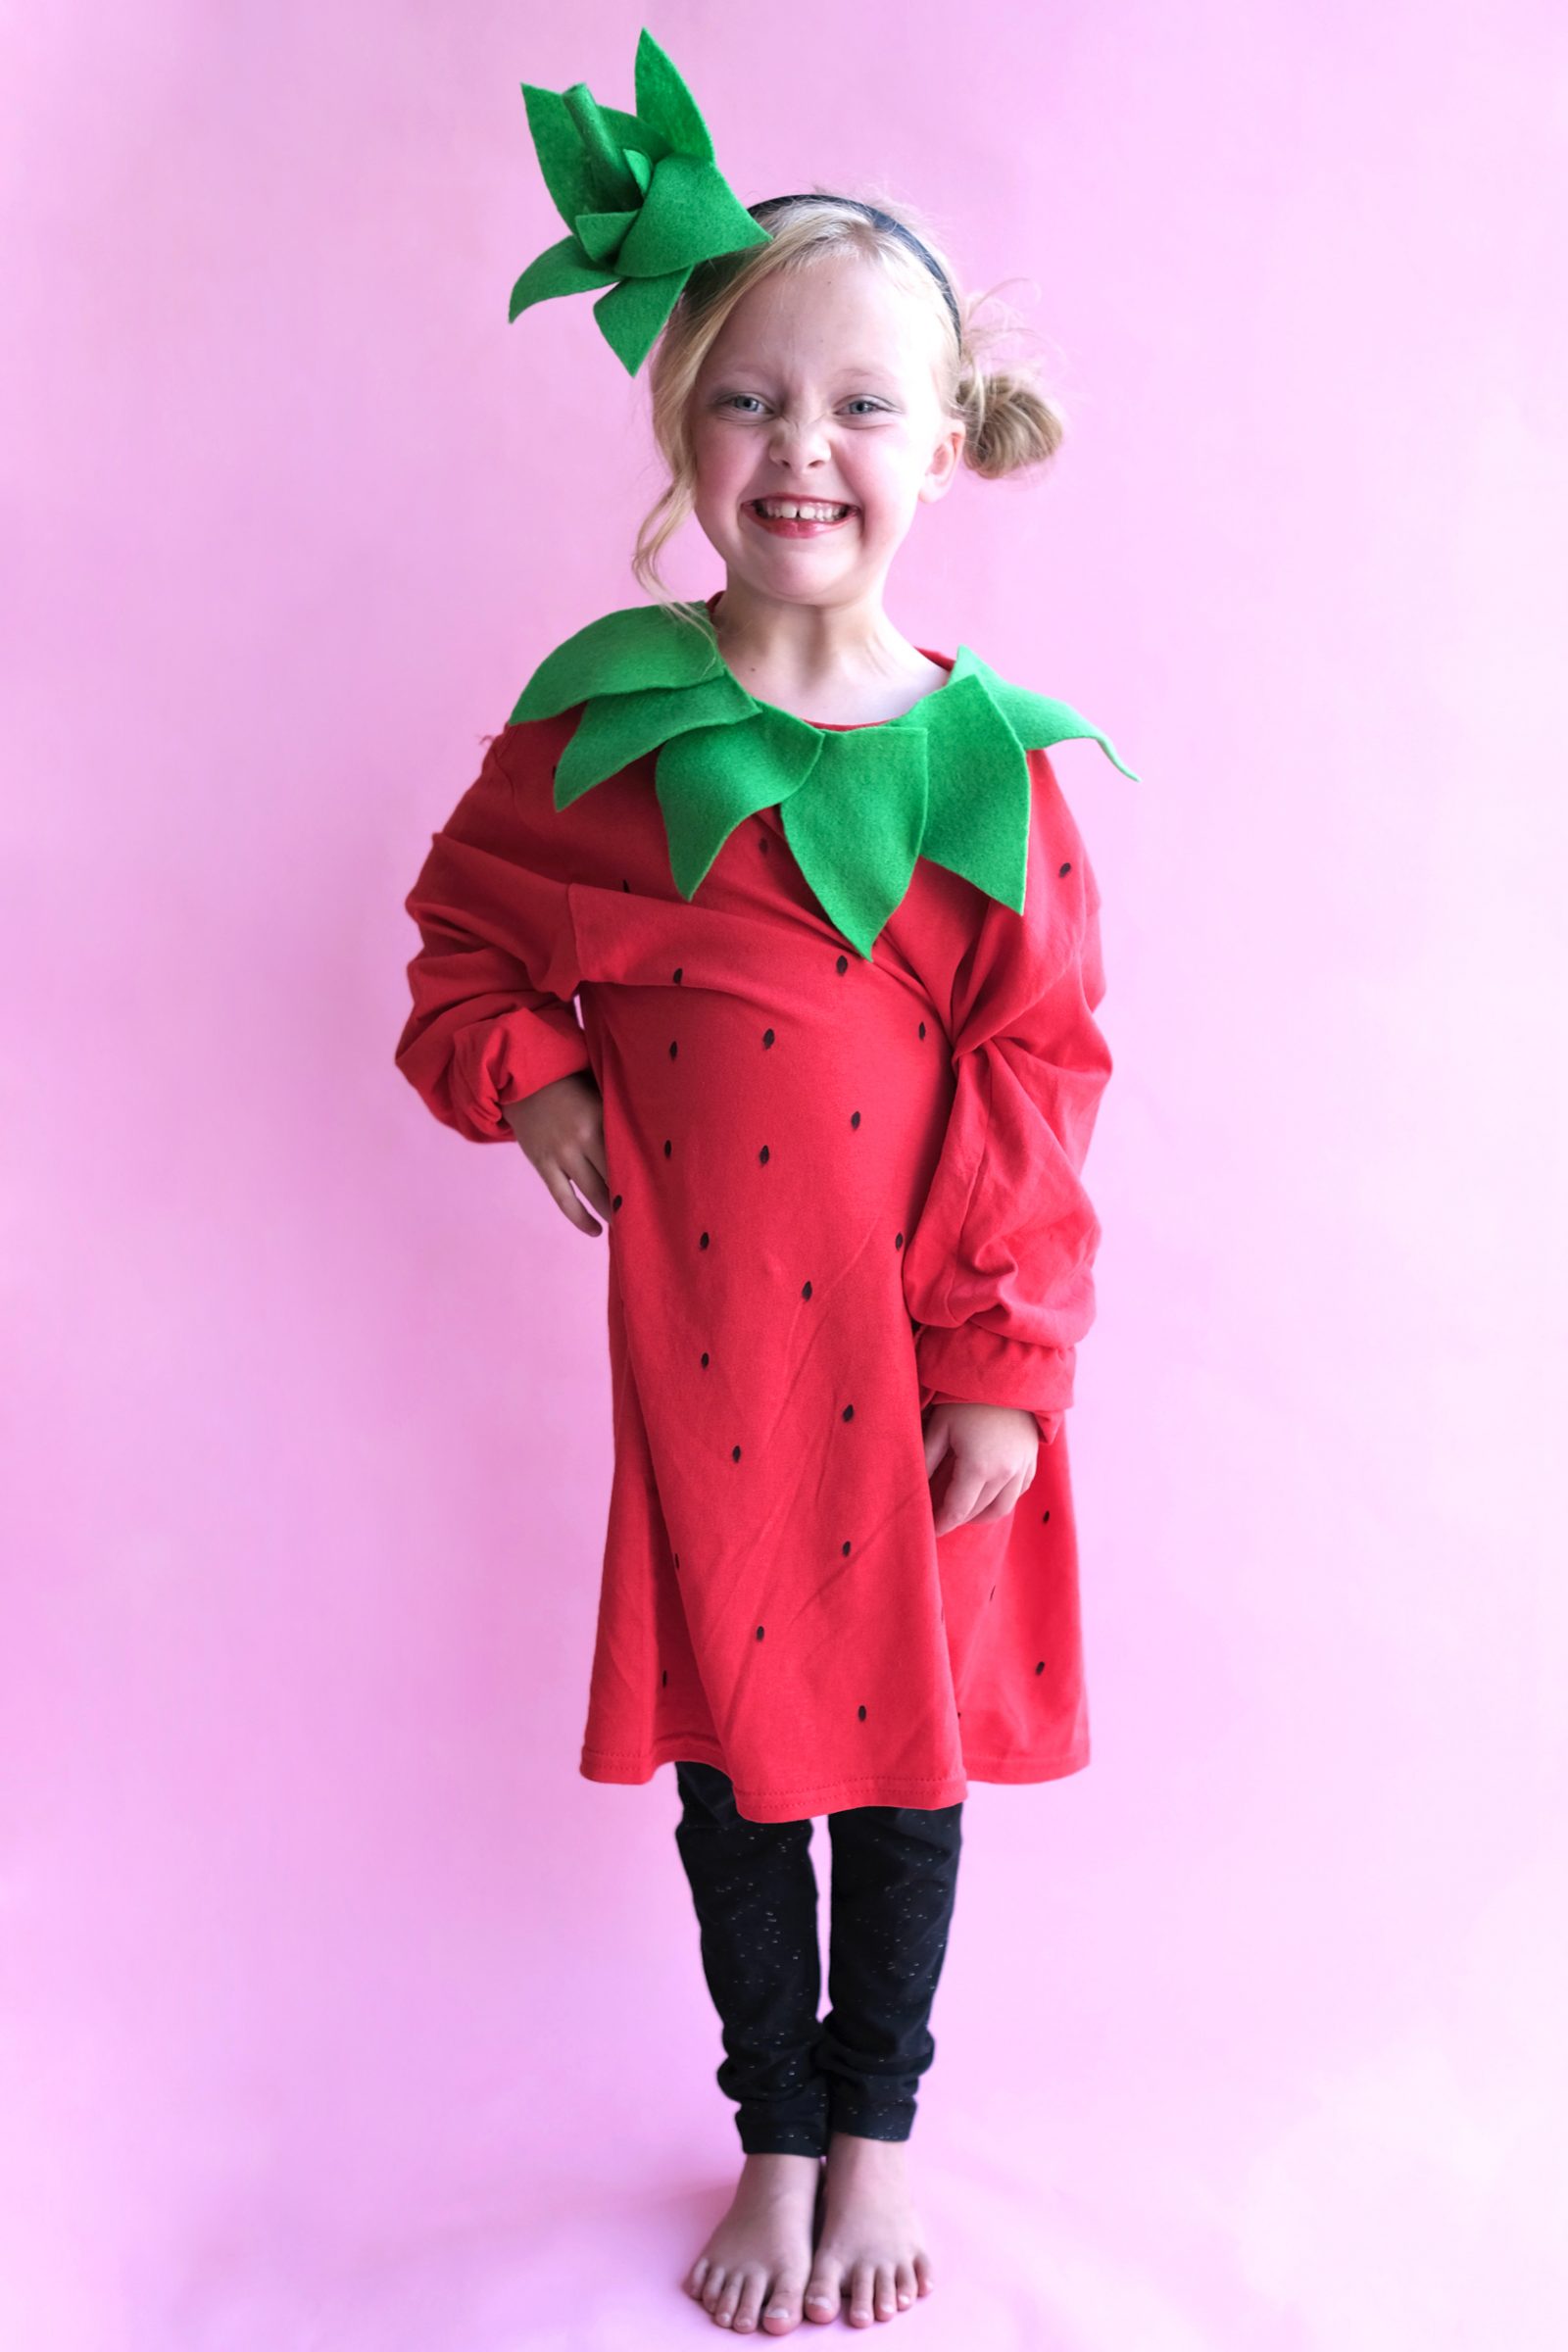 how to make fruit costume at home